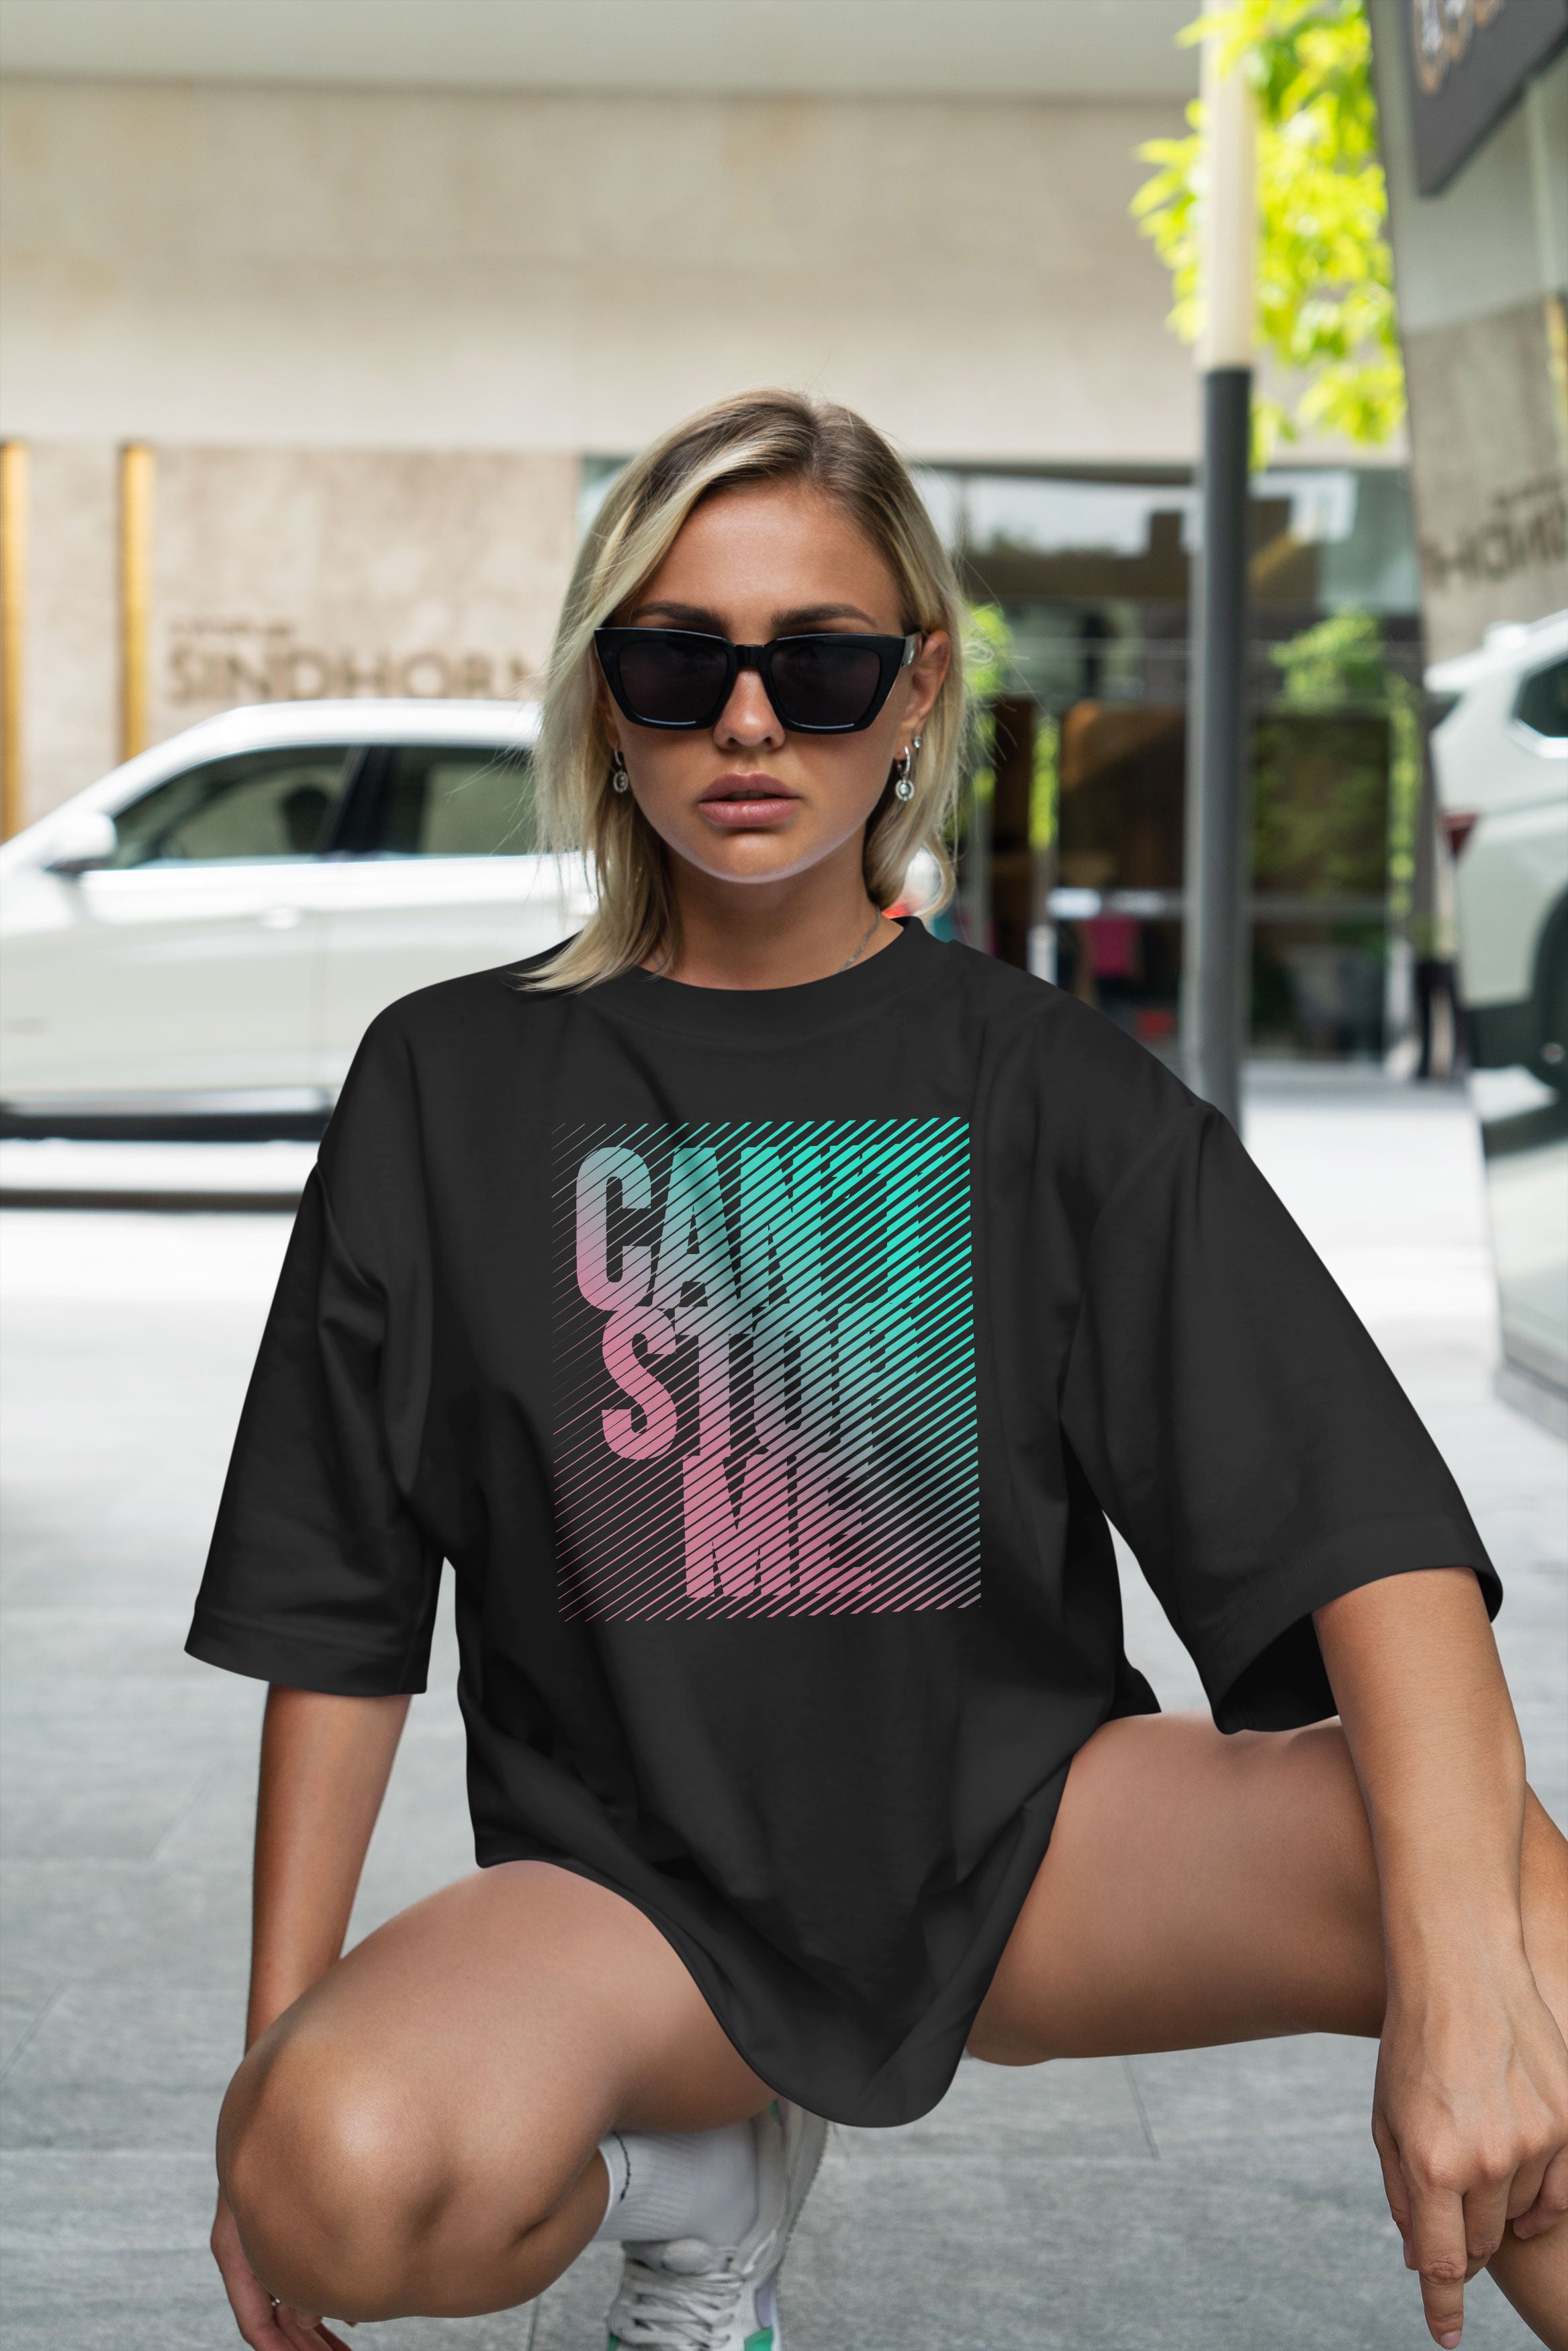 Brewing Hot Oversized Tshirt Unisex Cant Stop Me Tshirts